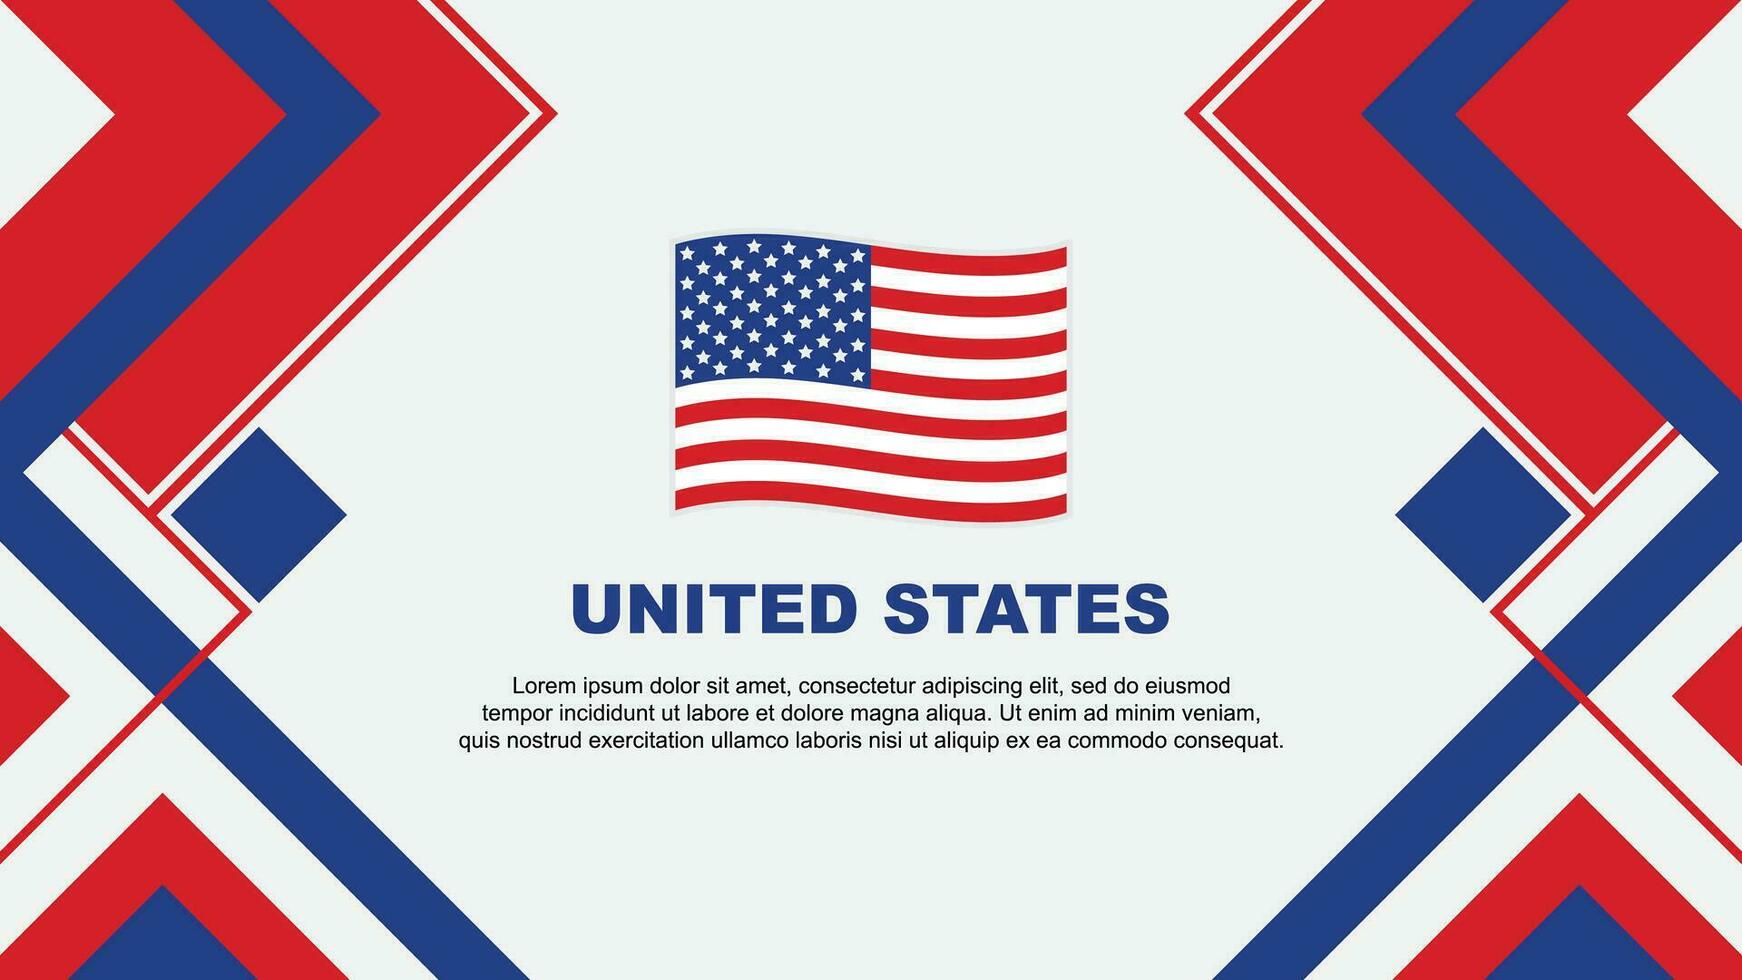 United States Flag Abstract Background Design Template. United States Independence Day Banner Wallpaper Vector Illustration. United States Banner